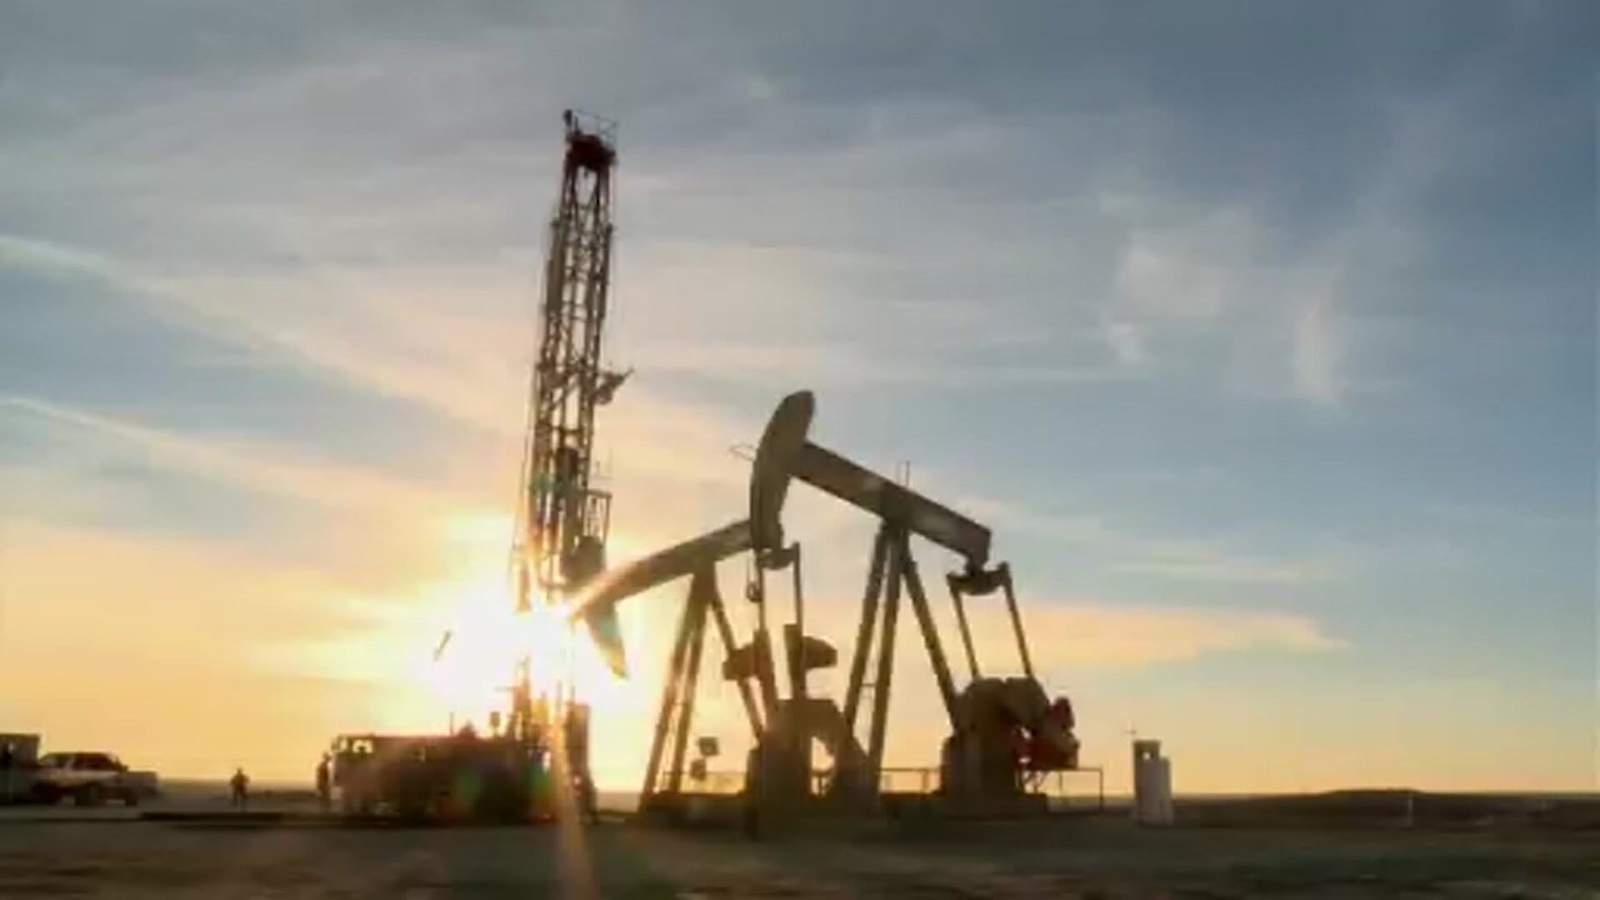 Houston company hopes to pump new life into Oil and Gas industry that’s been crushed by COVID-19